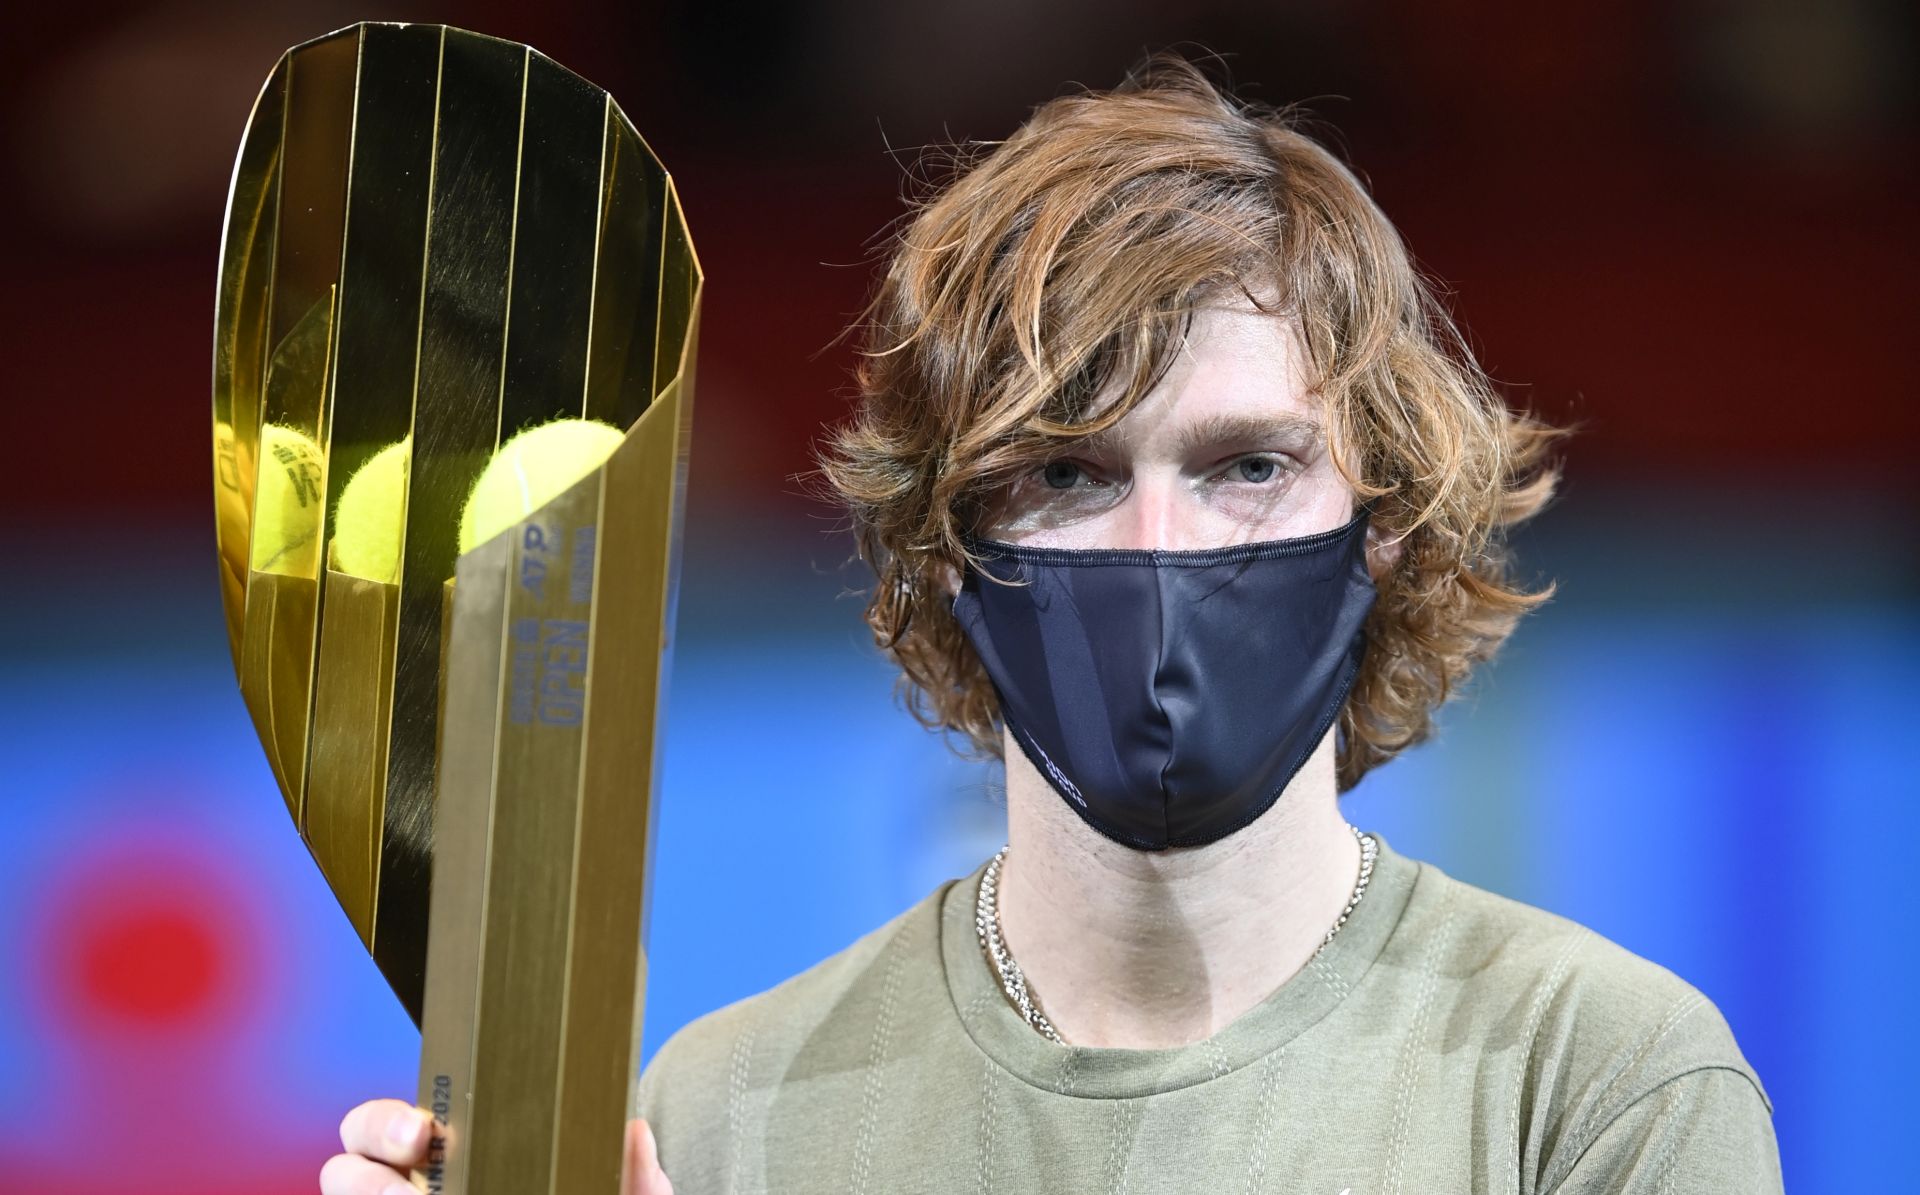 epa08791117 Andrey Rublev of Russia poses with his trophy after winning his final match against Lorenzo Sonego of Italy at the Erste Bank Open ATP tennis tournament in Vienna, Austria, 01 November 2020.  EPA/CHRISTIAN BRUNA